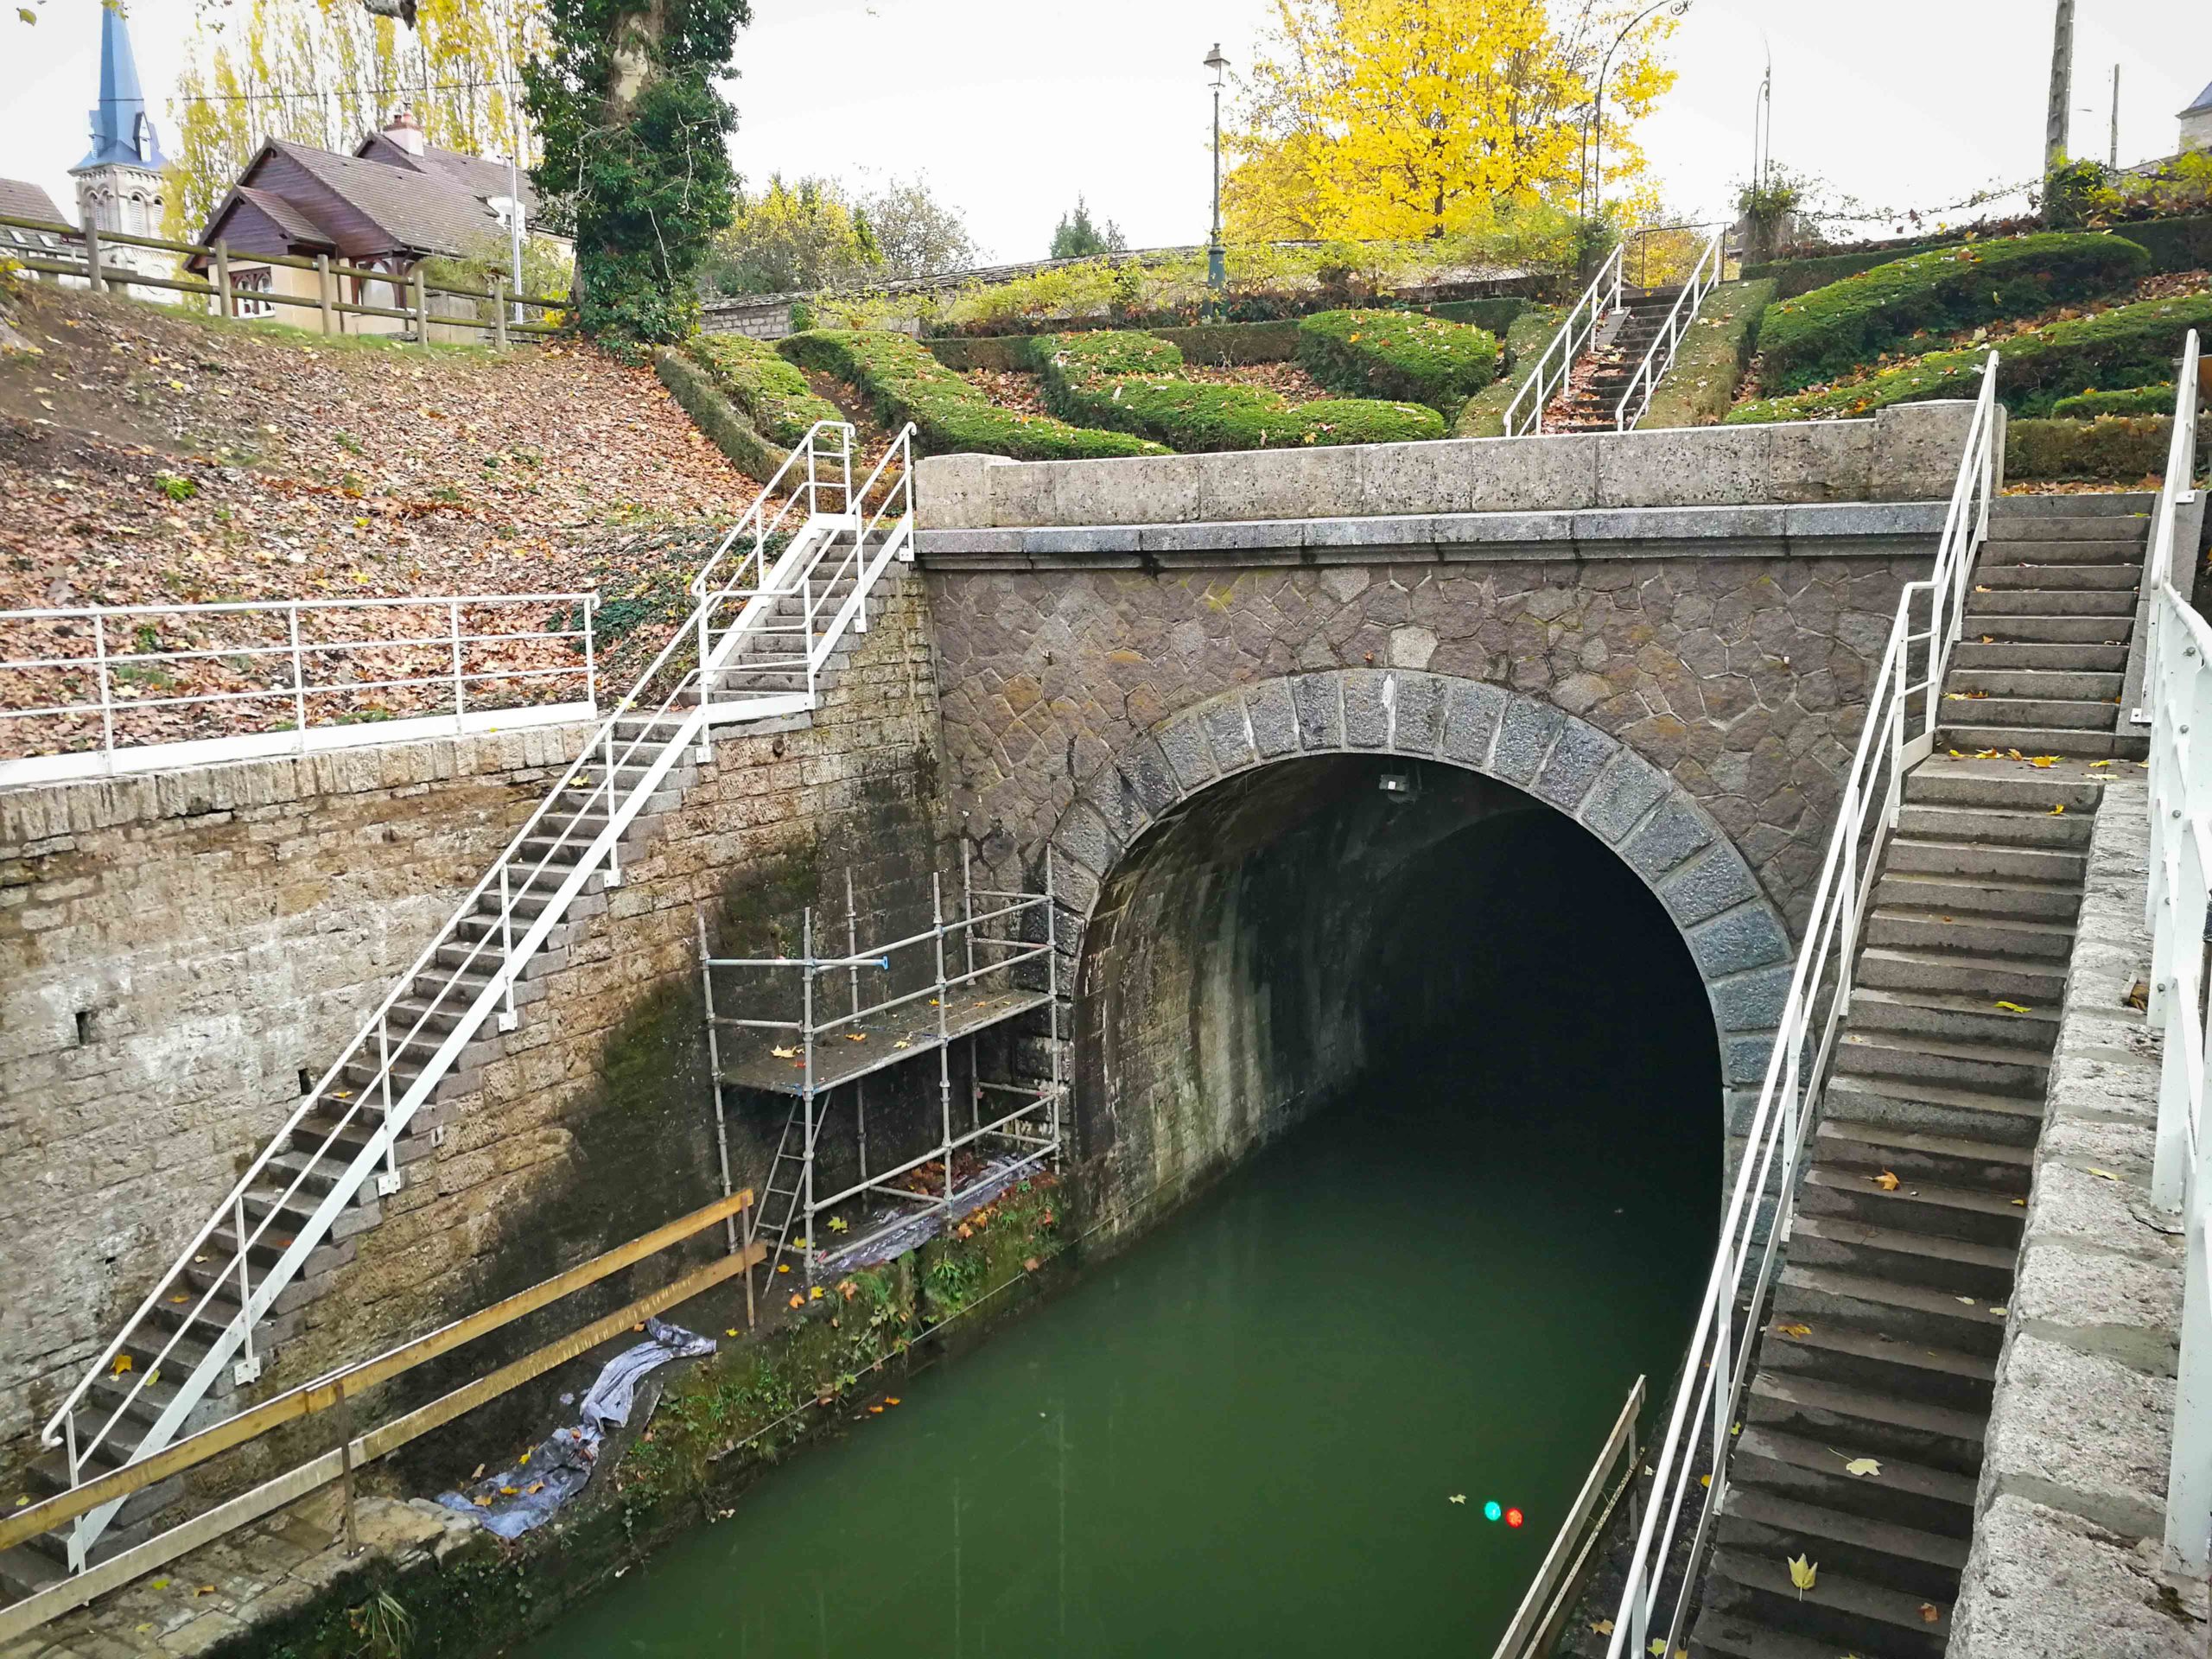 The tunnel of the Canal de Bourgogne in Pouilly-en-Auxois © Hystiff - licence [CC BY-SA 3.0] from Wikimedia Commons